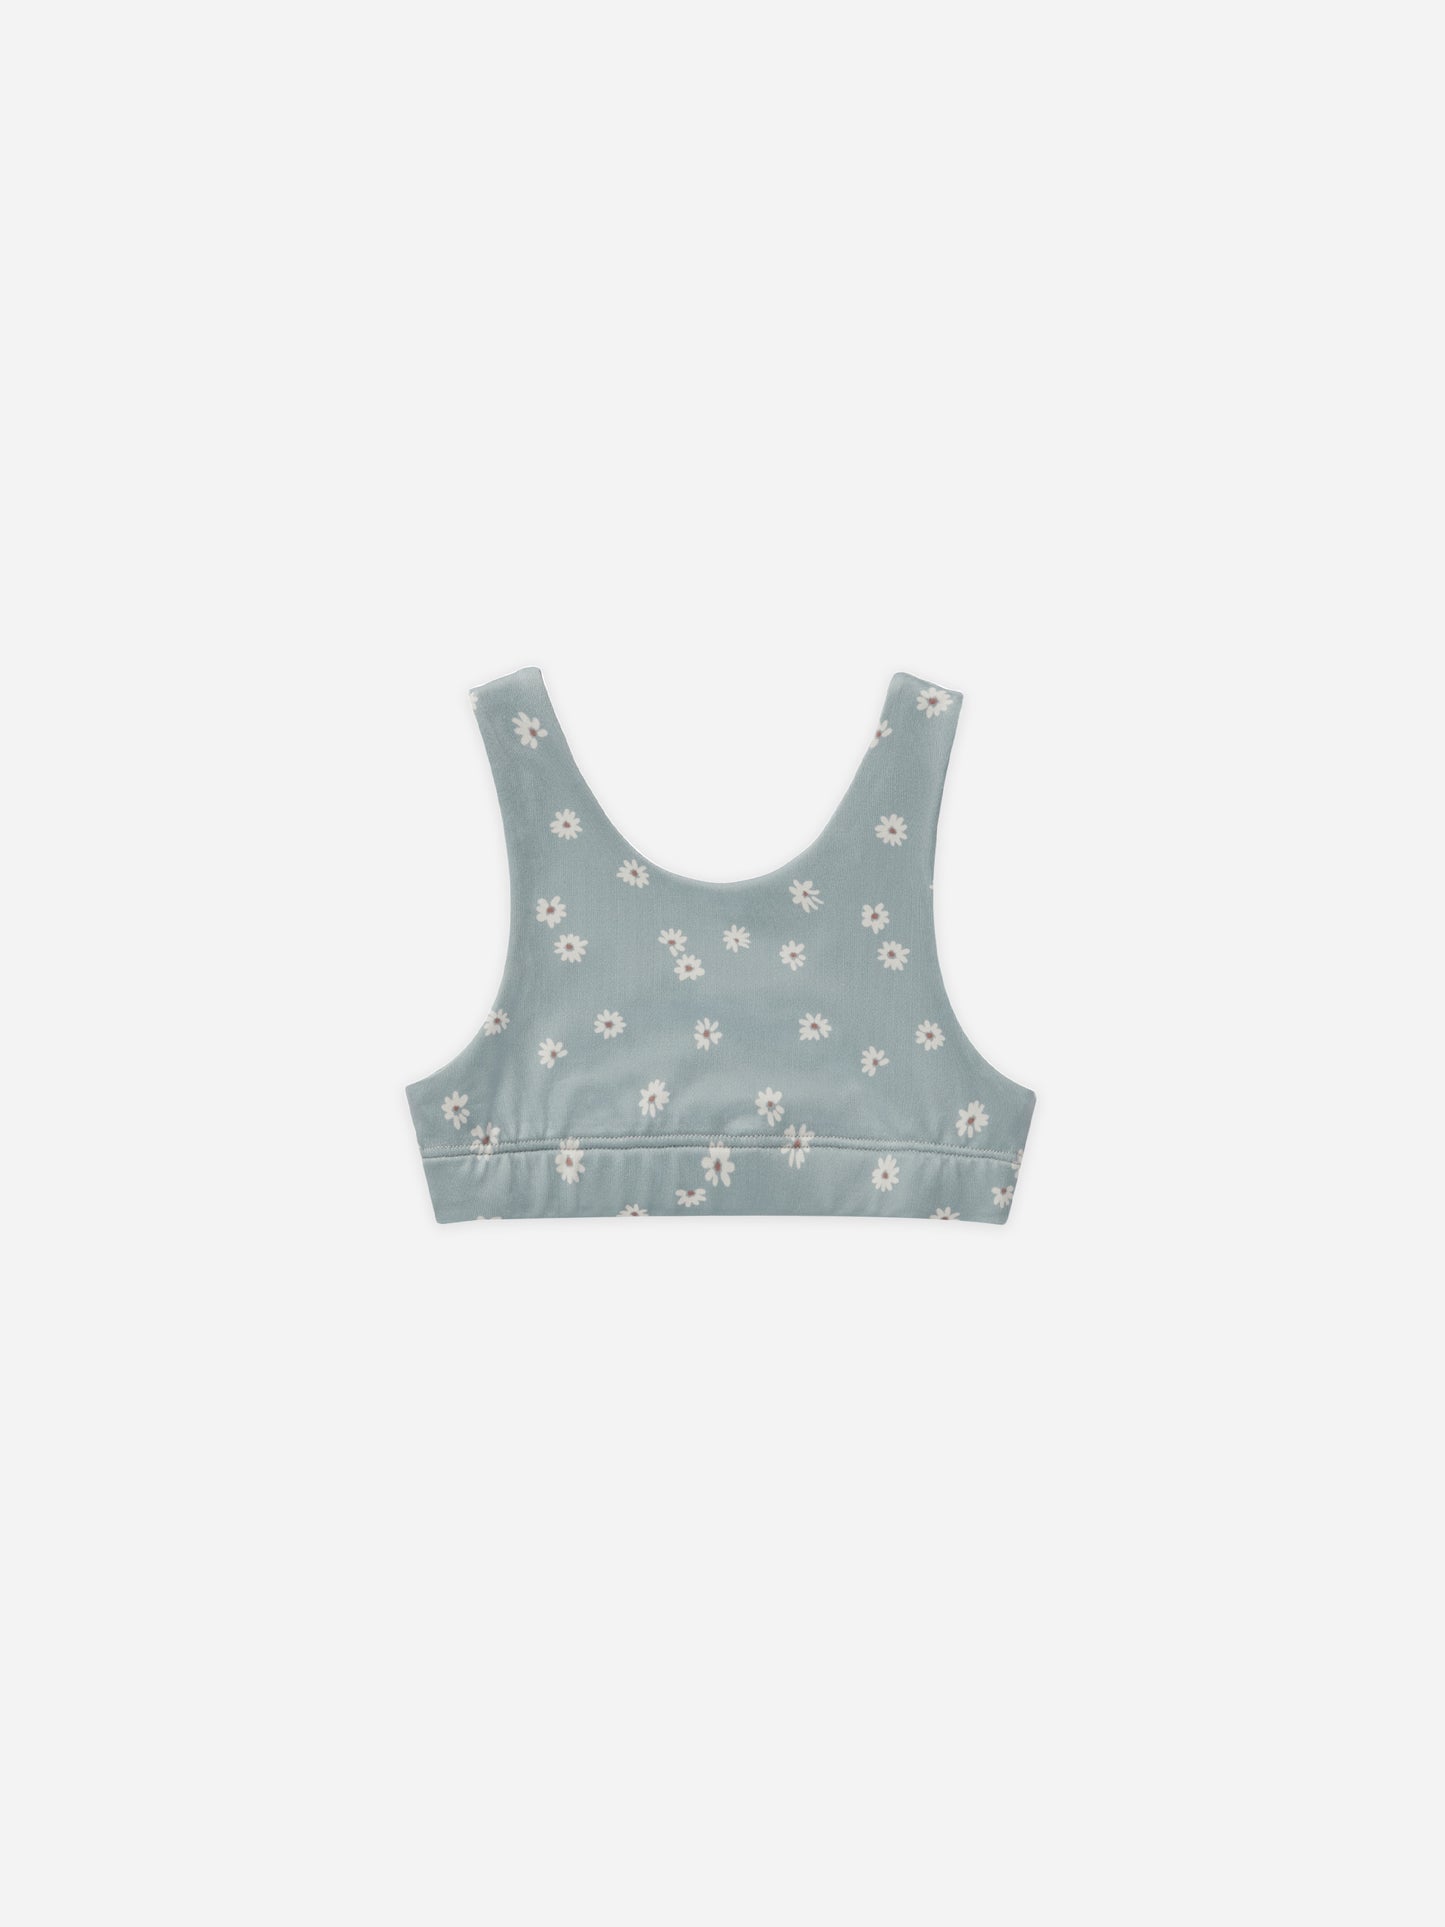 Longline Bra || Blue Daisy - Rylee + Cru | Kids Clothes | Trendy Baby Clothes | Modern Infant Outfits |